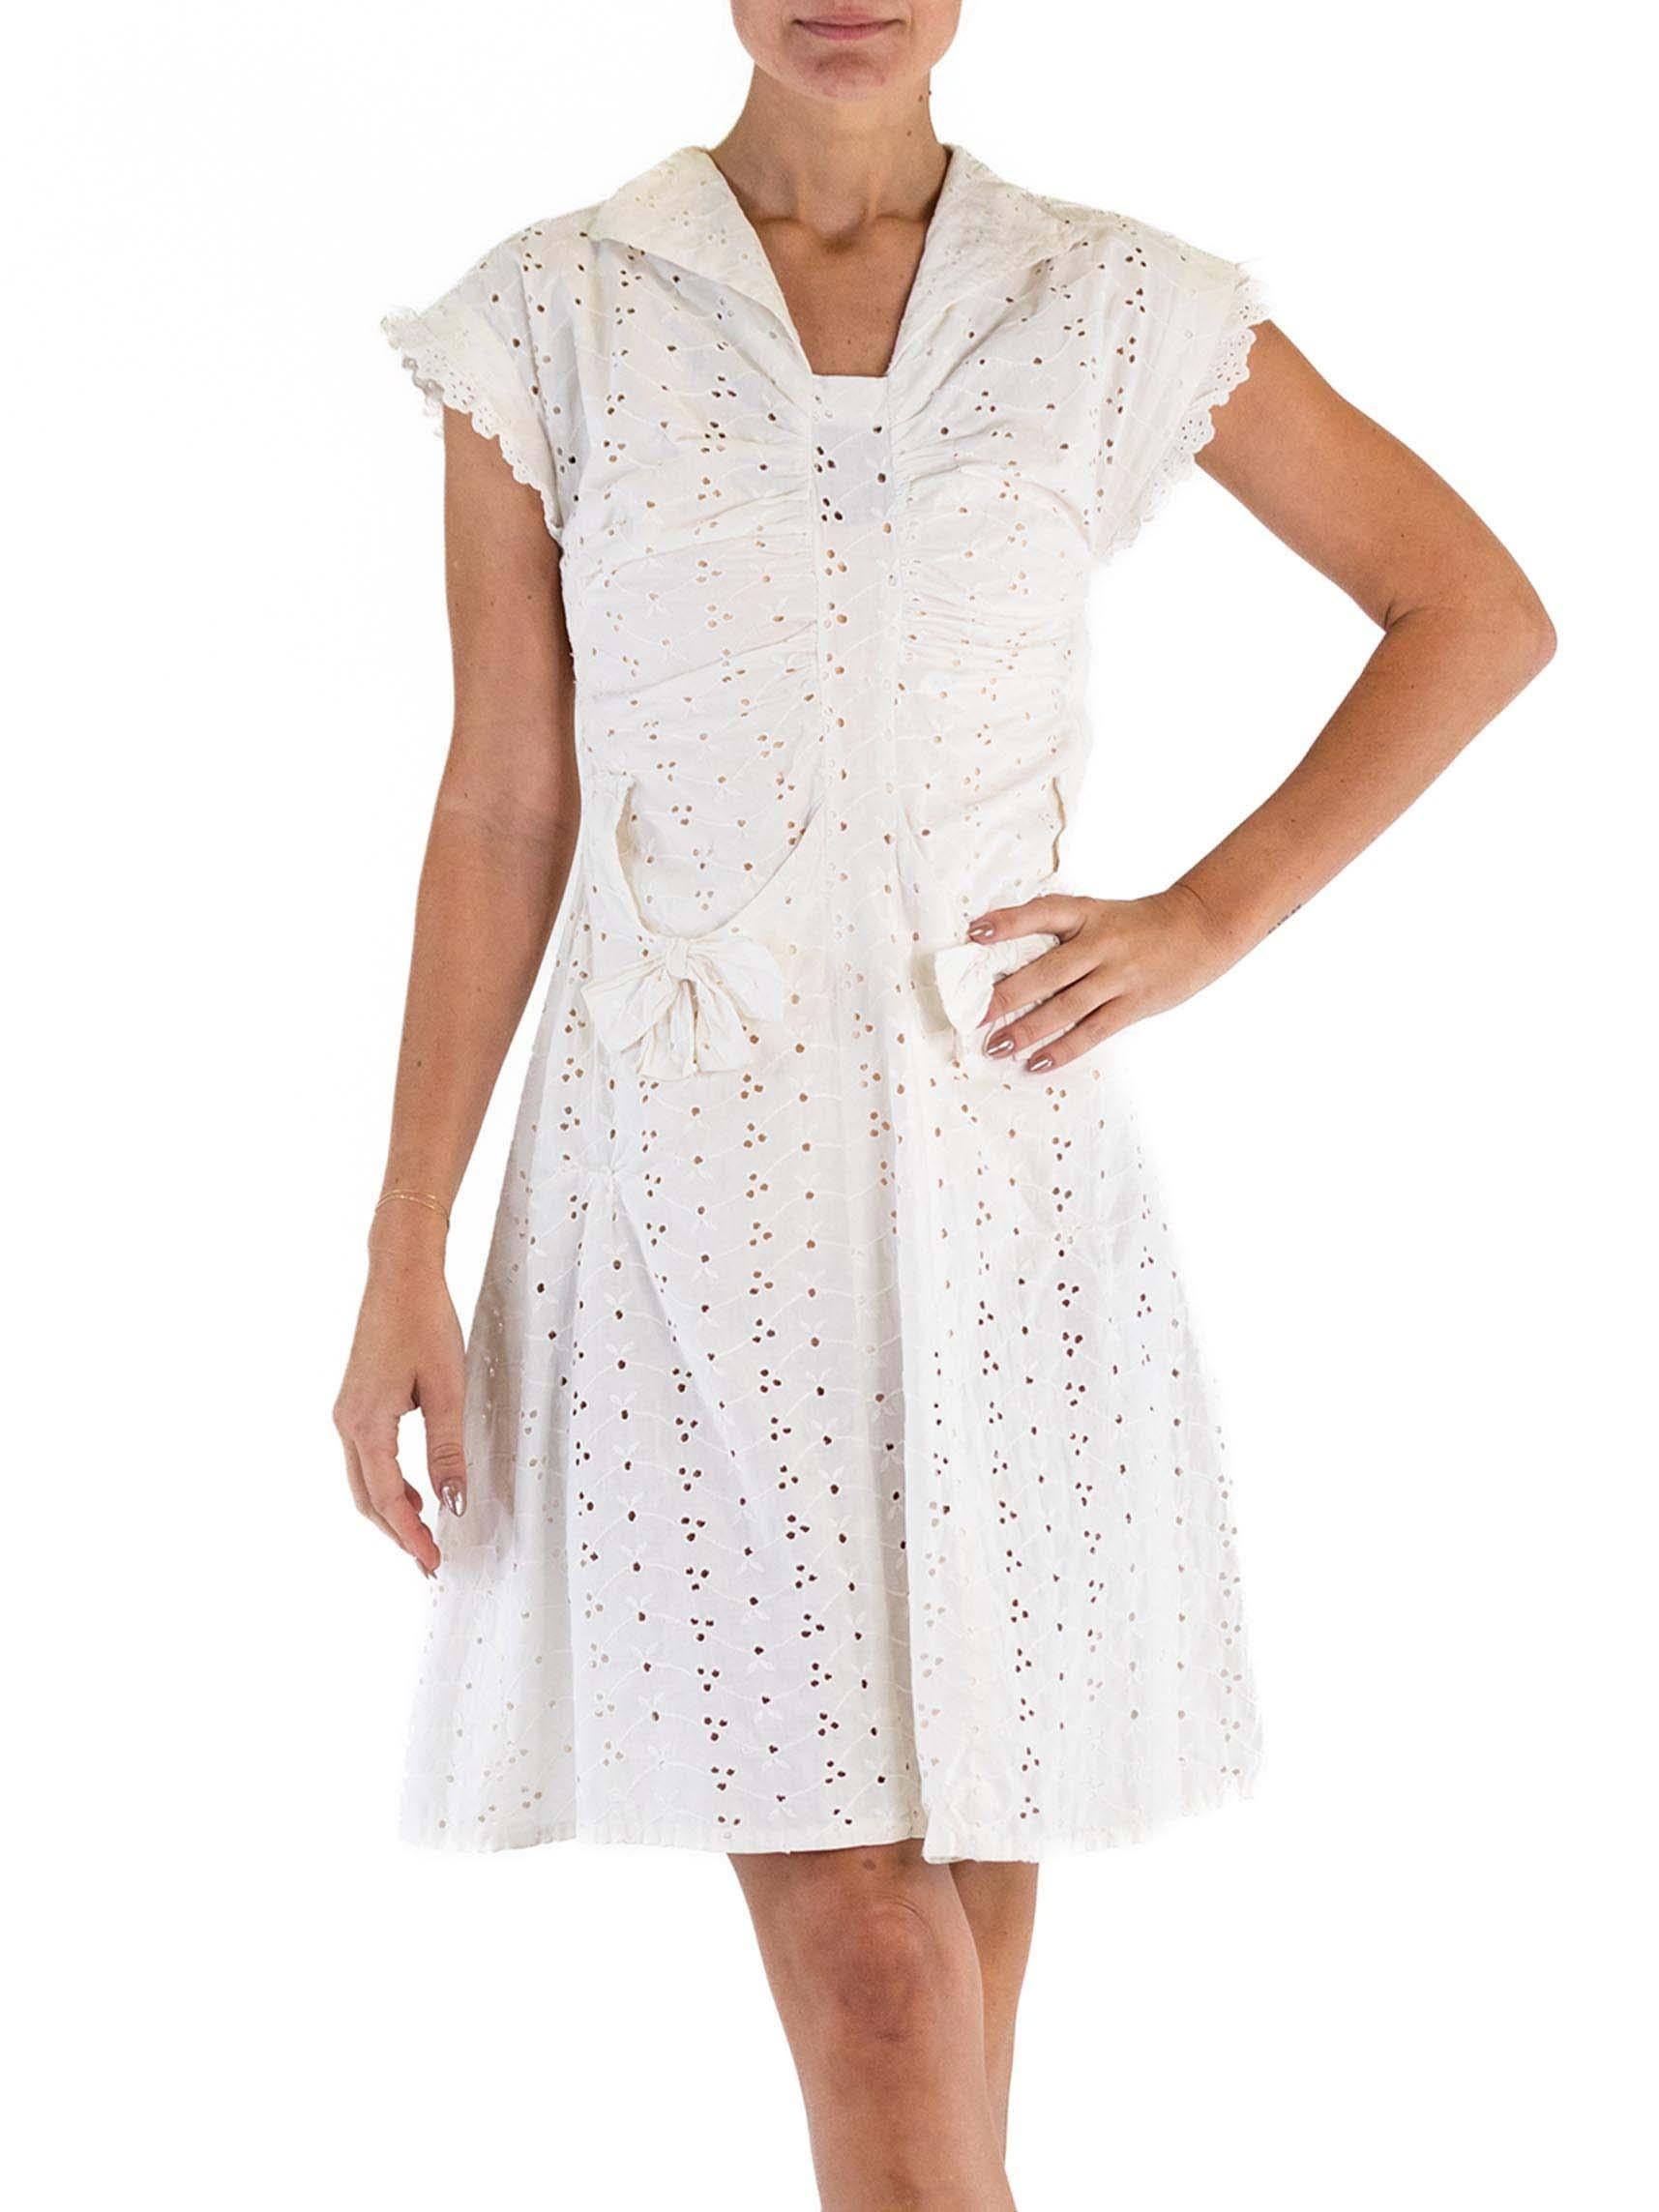 1930S White Cotton Eyelet Lace Cute Little Dress With Bow Pockets For Sale 2